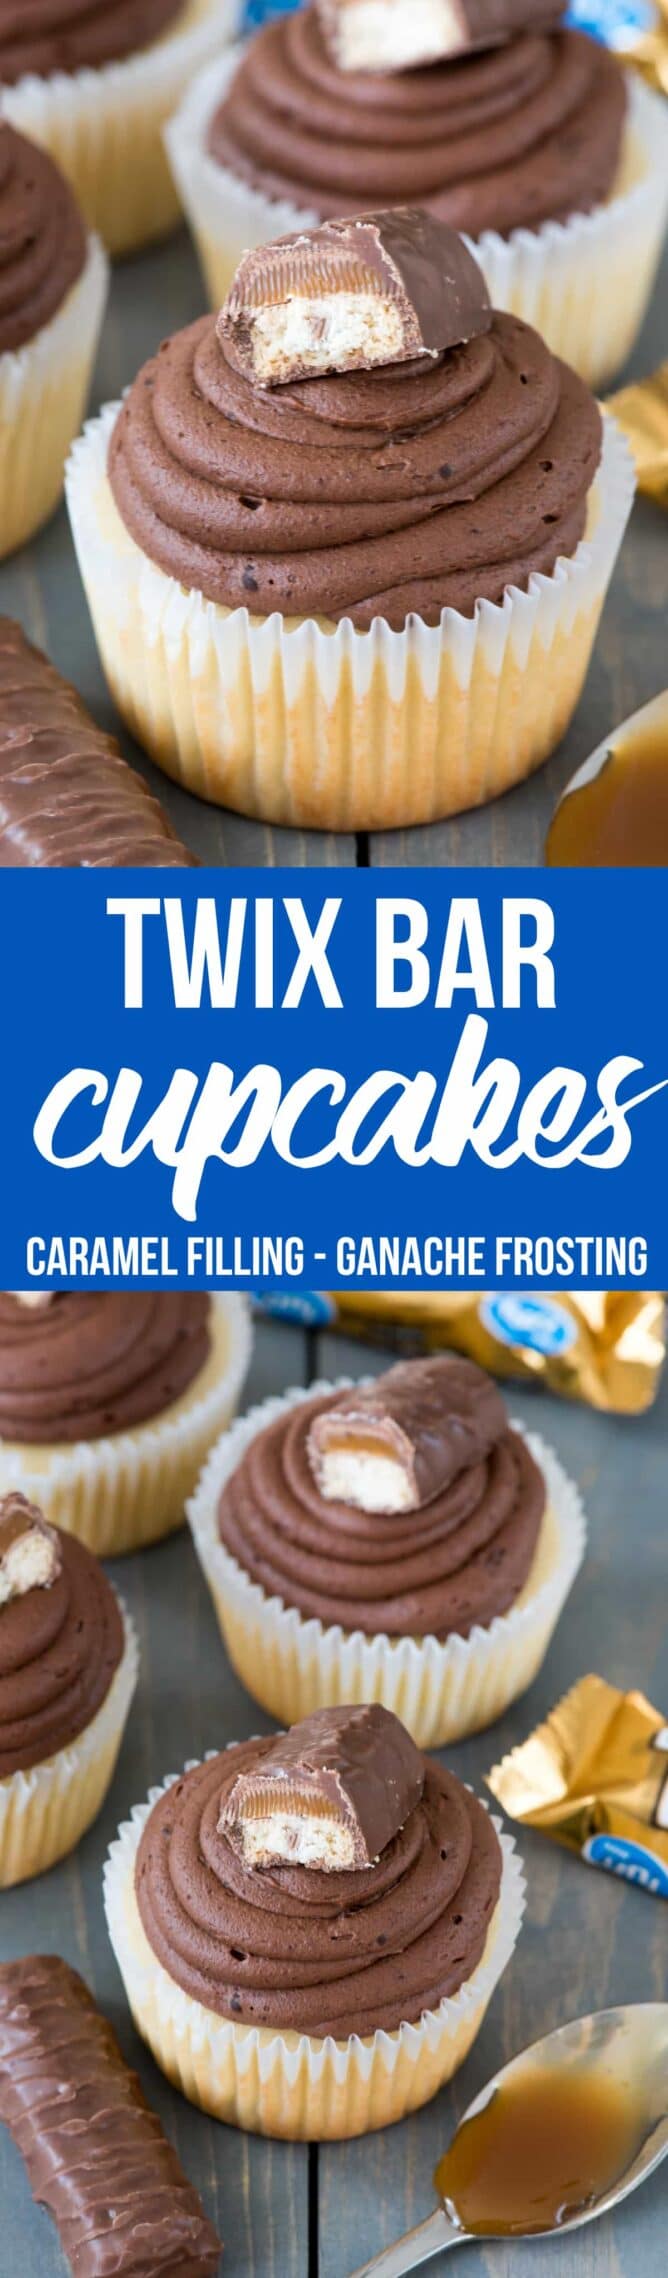 This easy cupcake recipe fills vanilla cupcakes with caramel and tops them with a chocolate ganache frosting like a Twix Candy Bar!